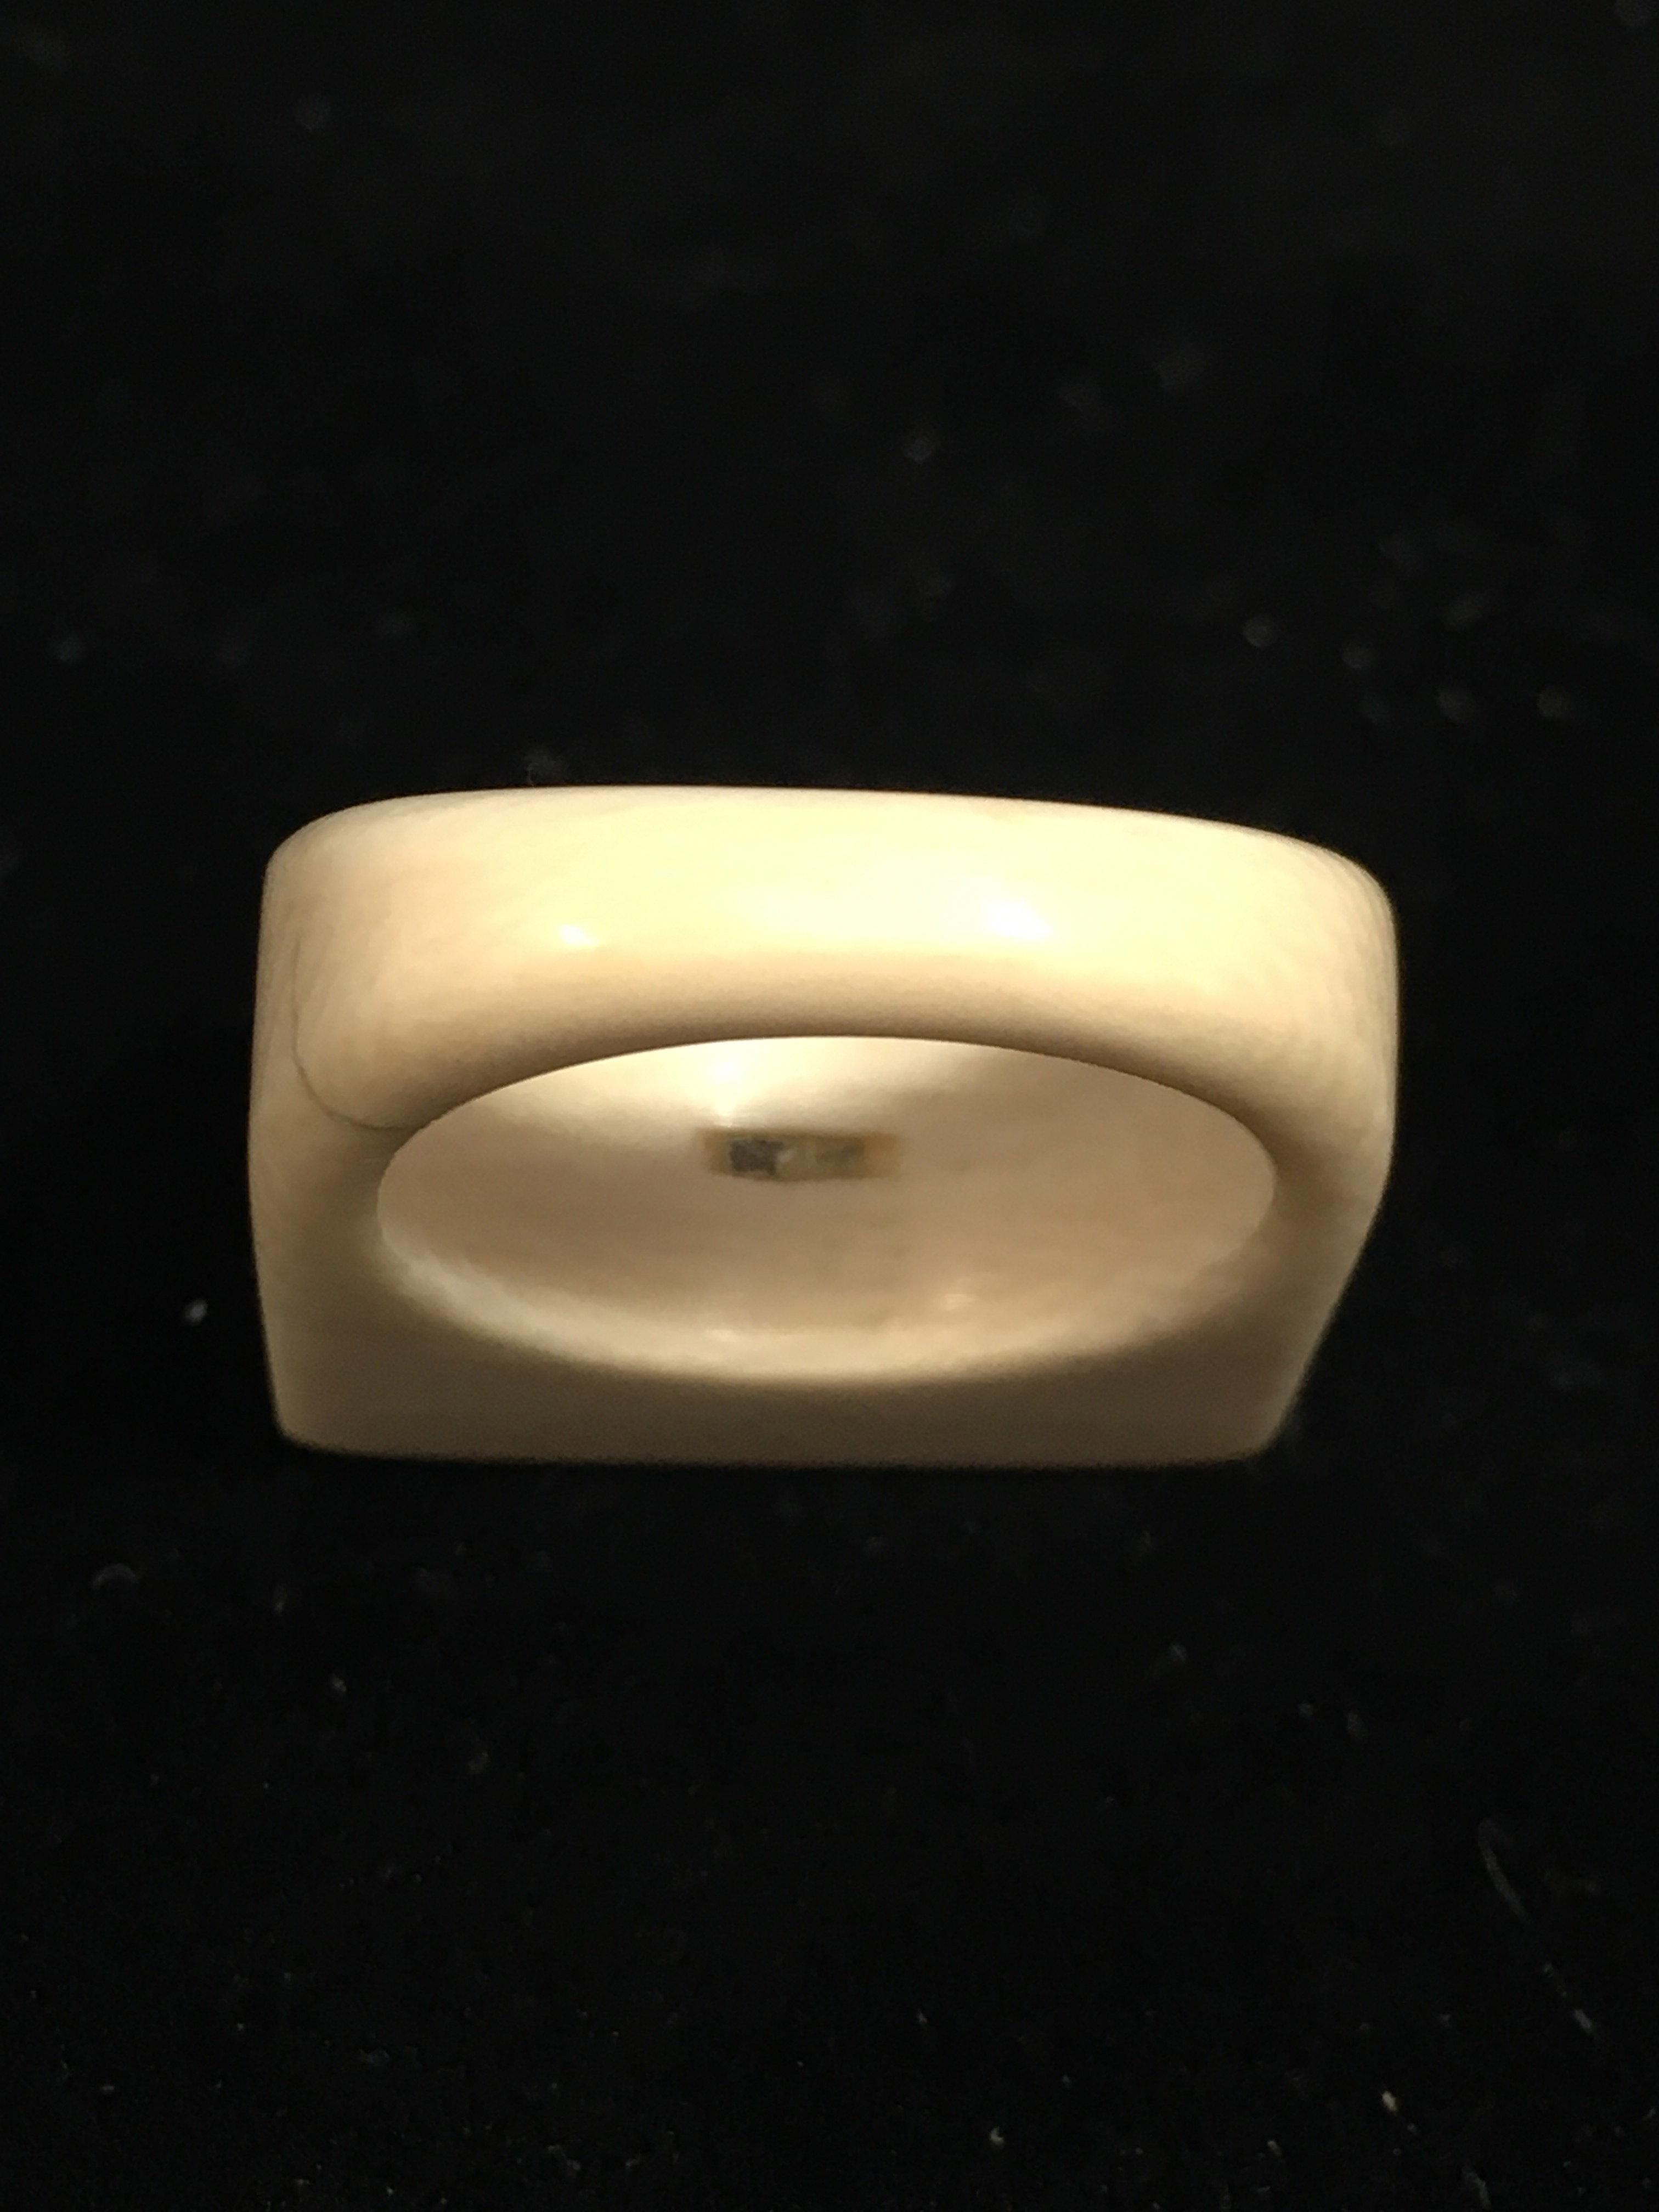 Bone, Sterling Silver , & Onyx Ring - Very Unique - Ivory? Size 7.5